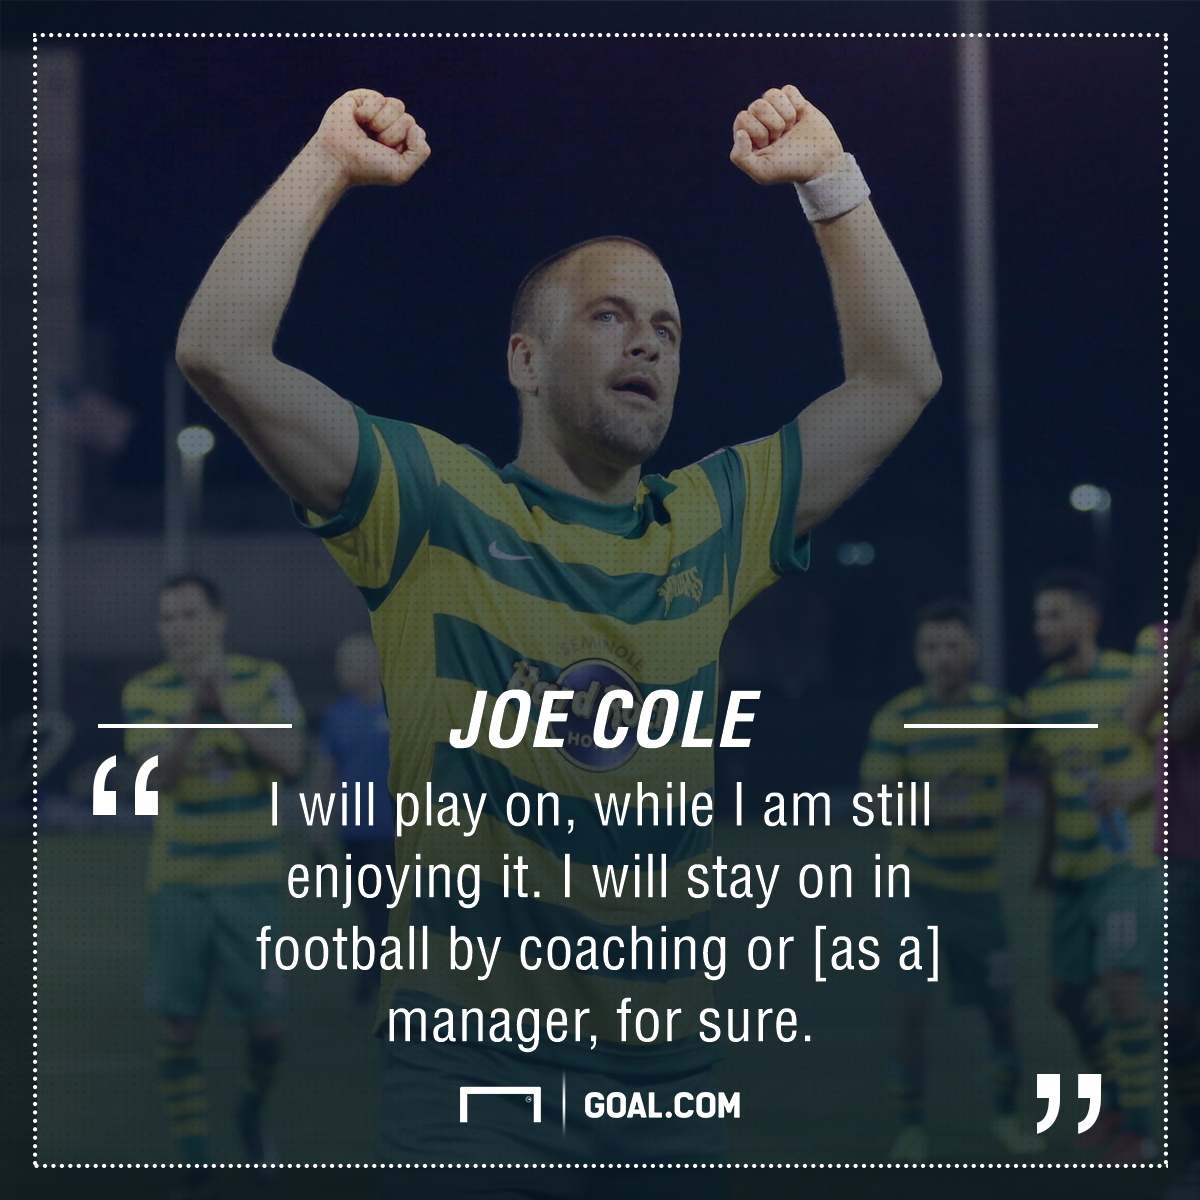 Sun, goals and assists: Joe Cole on how Tampa Bay Rowdies restored